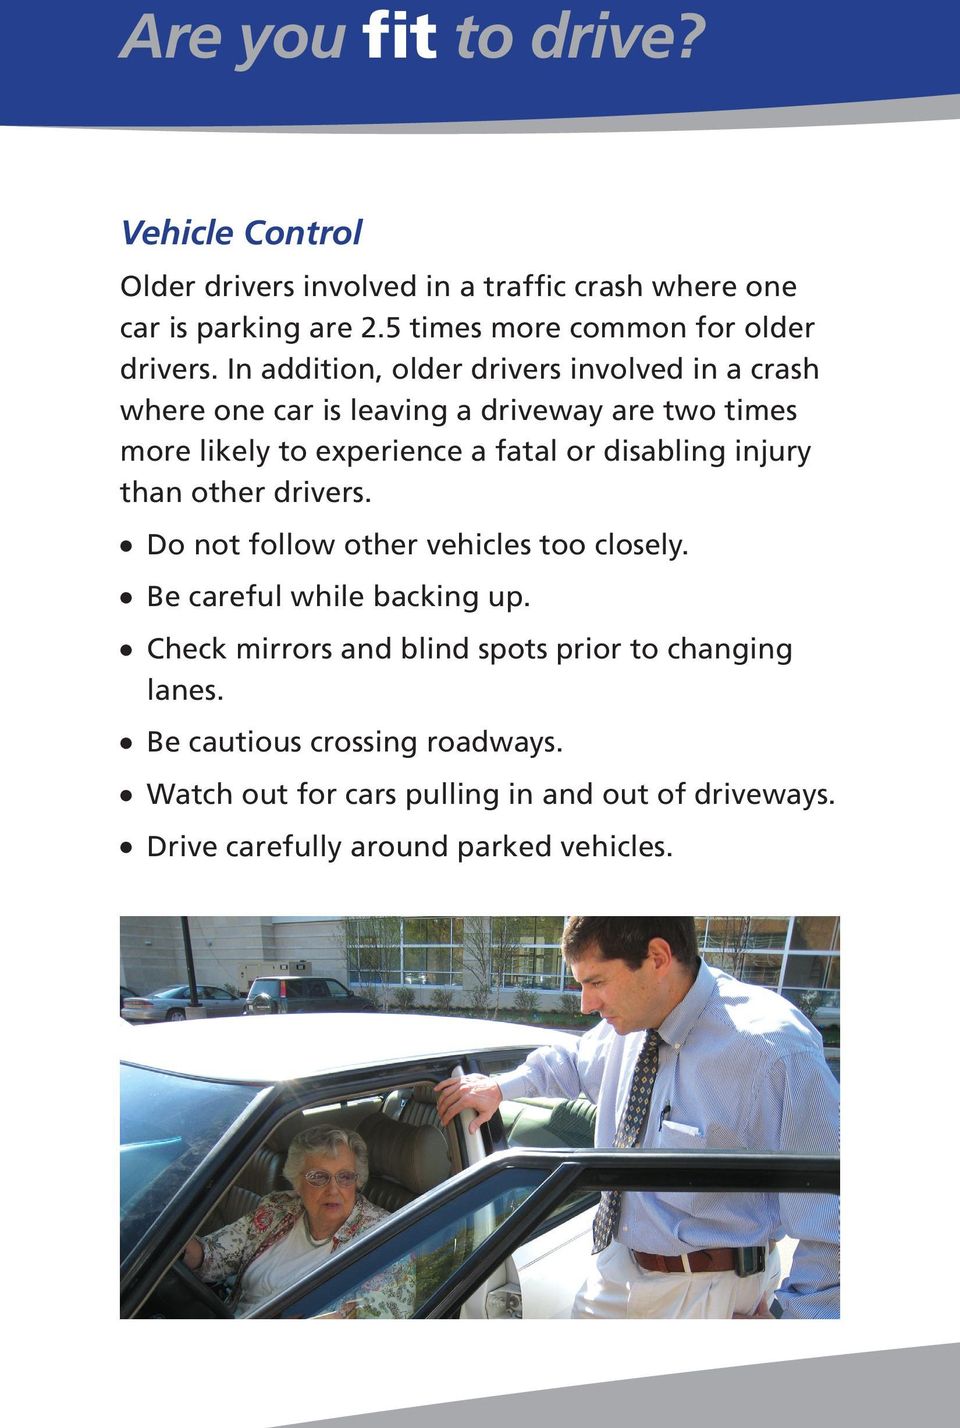 In addition, older drivers involved in a crash where one car is leaving a driveway are two times more likely to experience a fatal or disabling